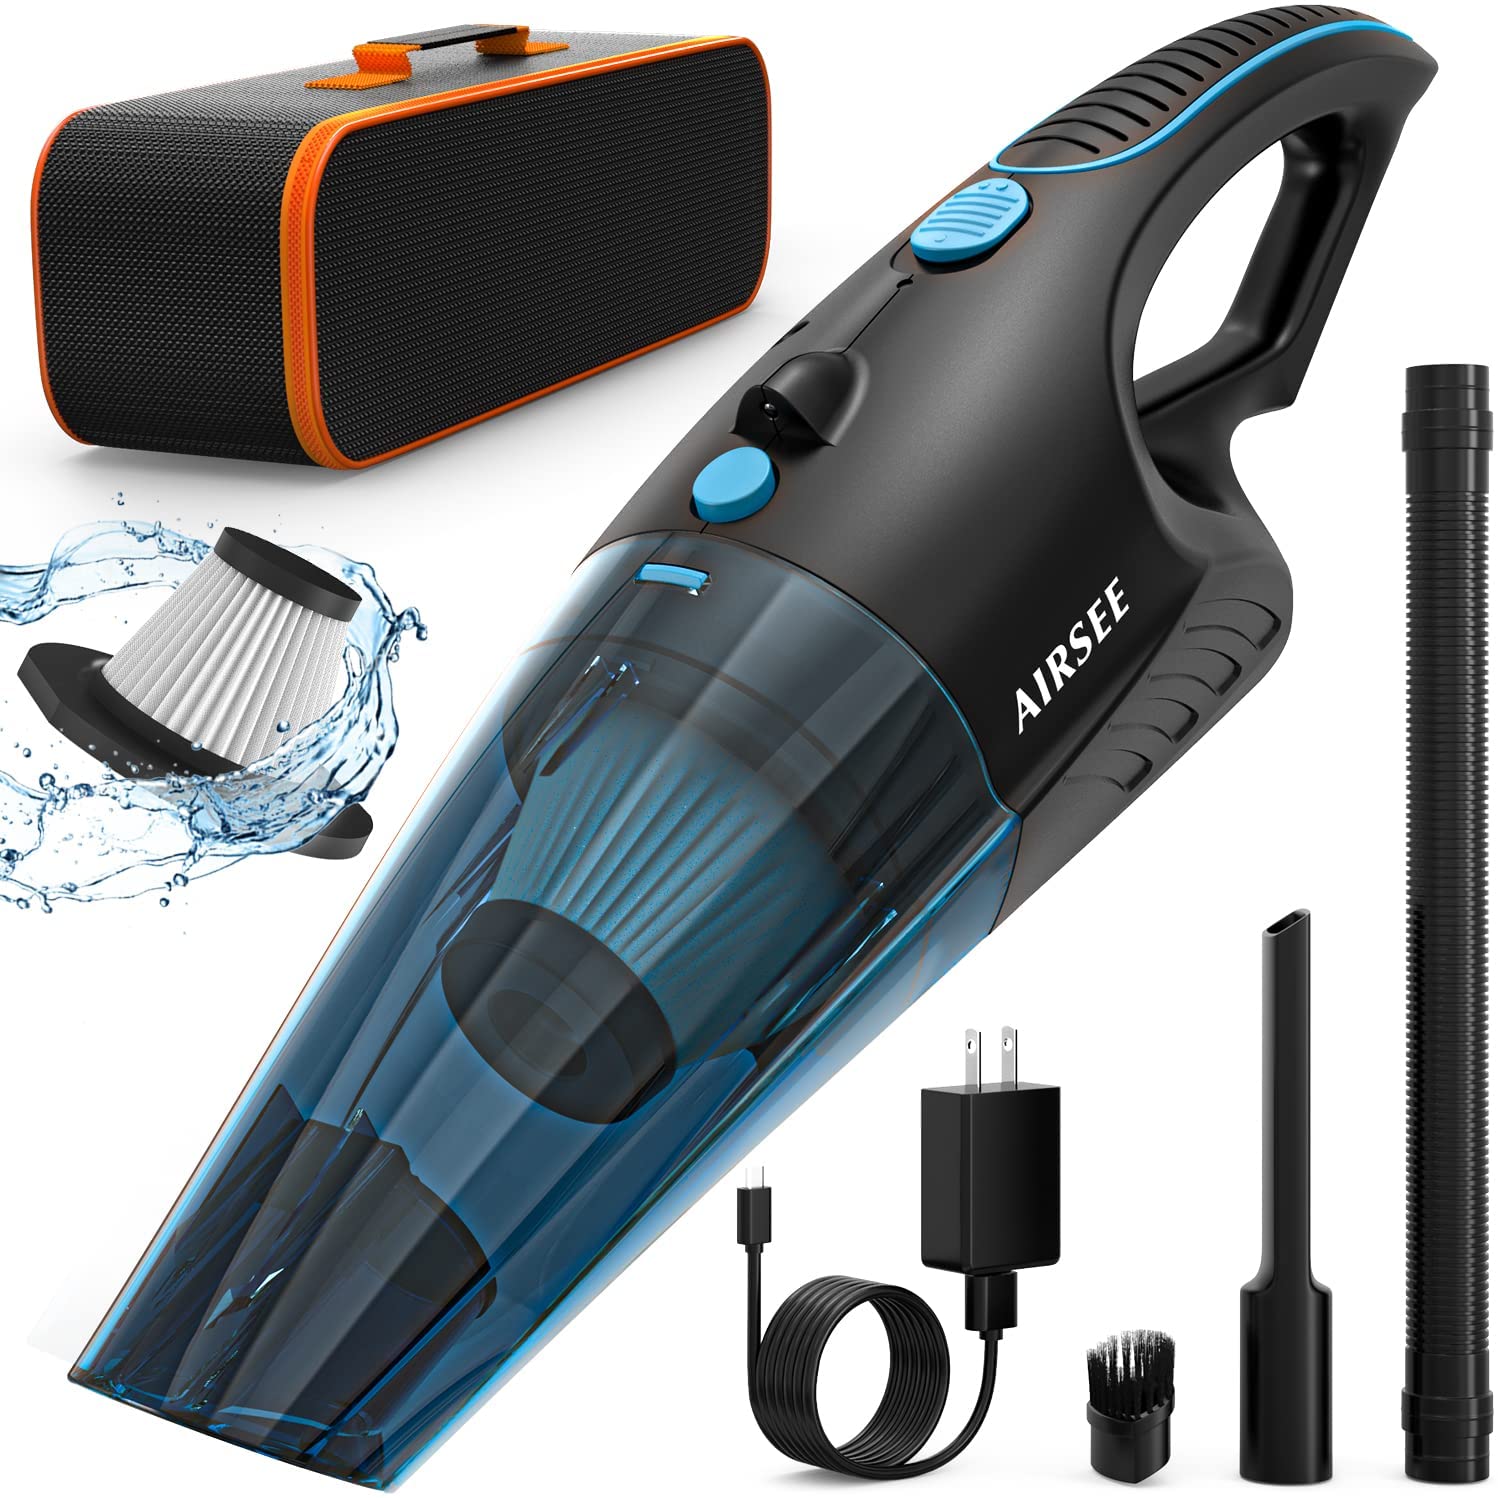 Black & Decker Cordless Orb Rechargeable Compact Hand Vacuum 